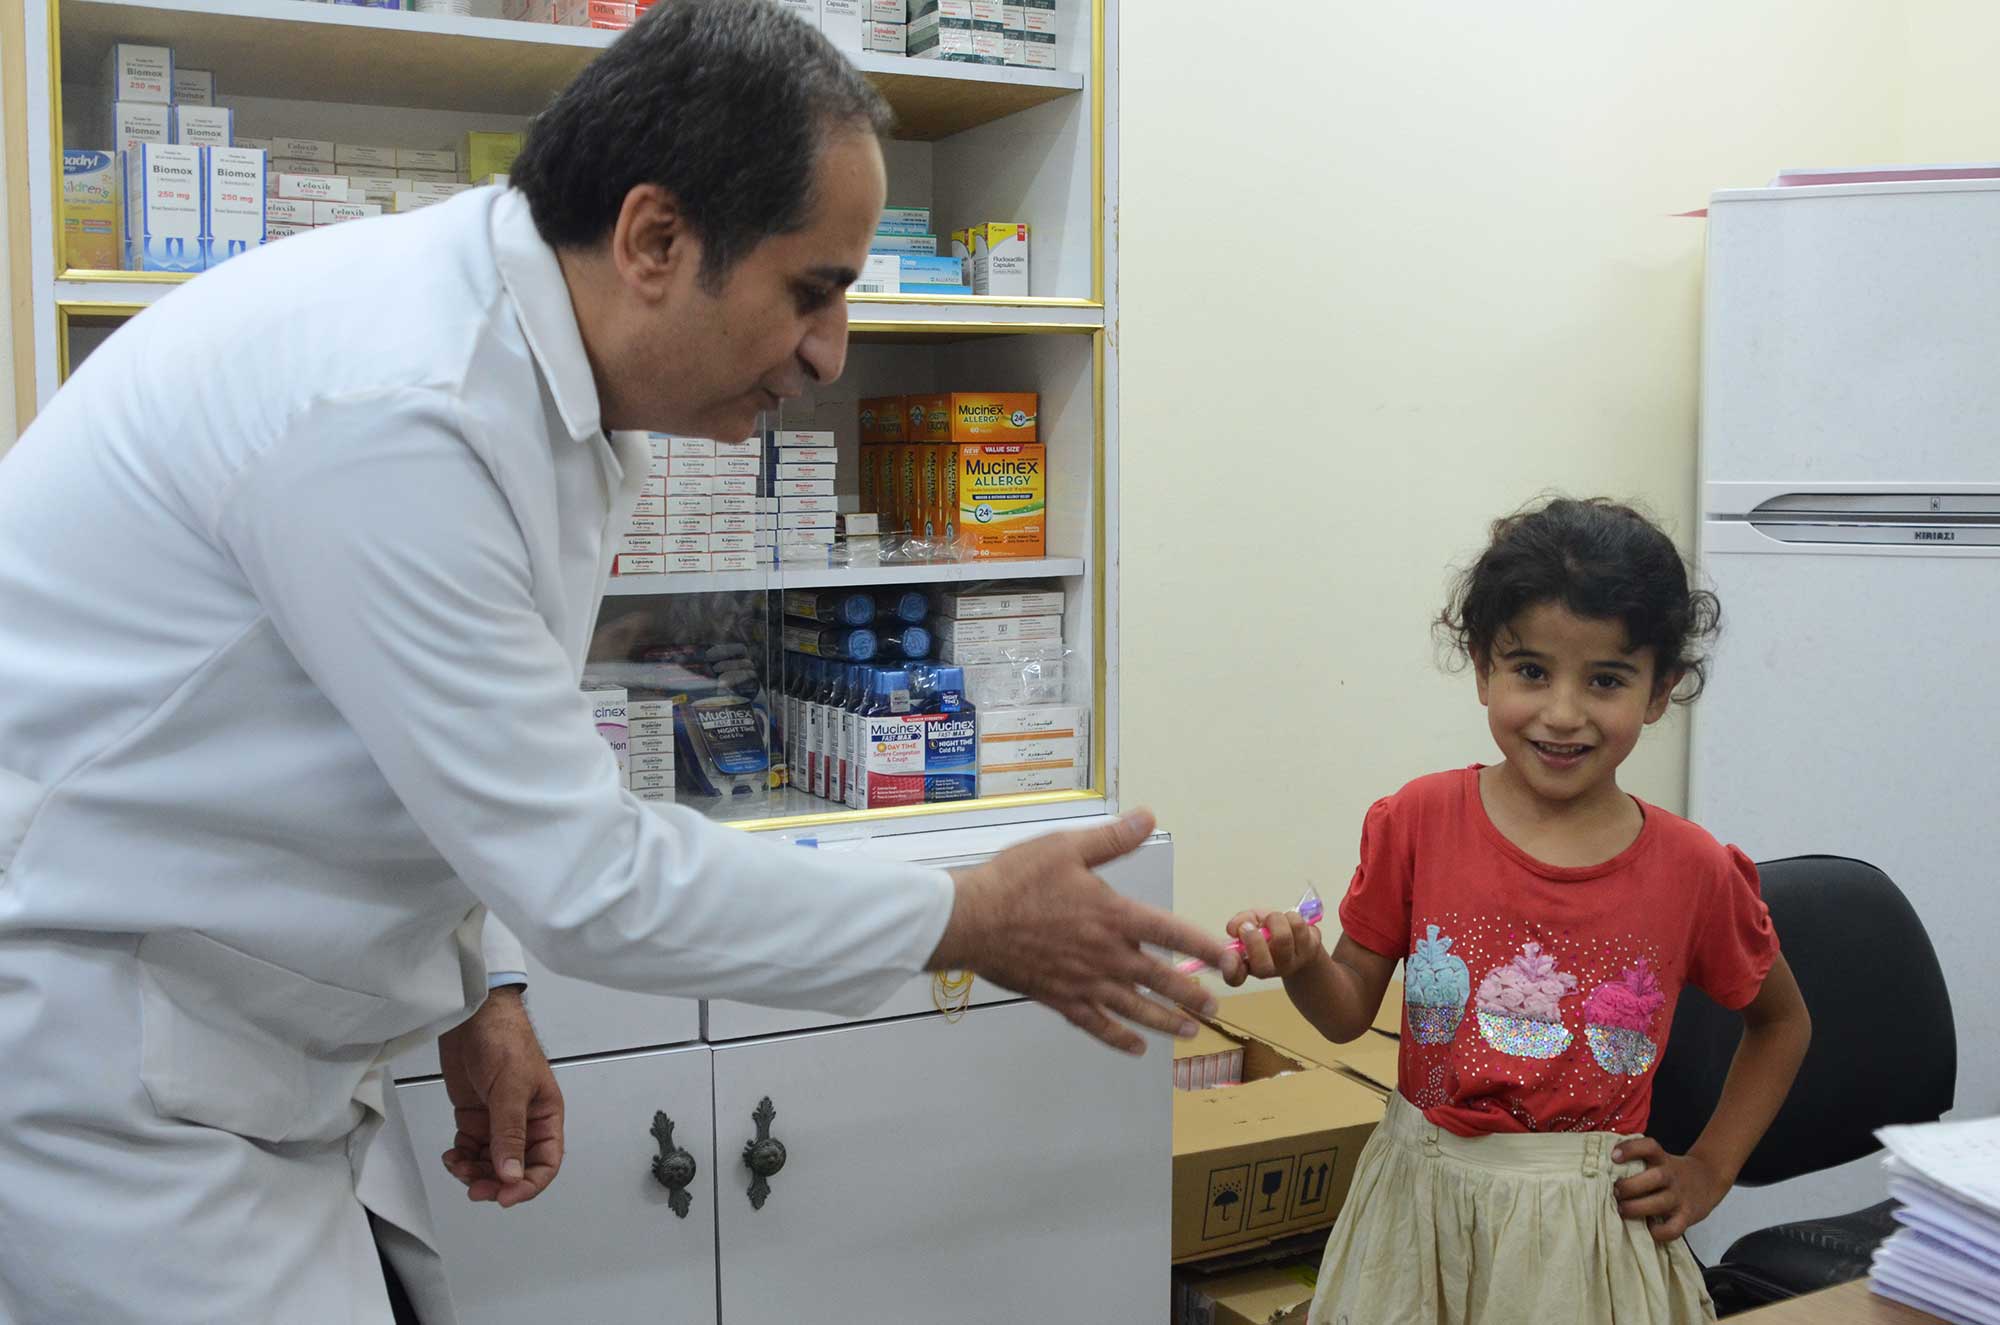 Sundus receives a pink toothbrush from her Dr. Barzaq, donated by Smile Squared and delivered by Anera